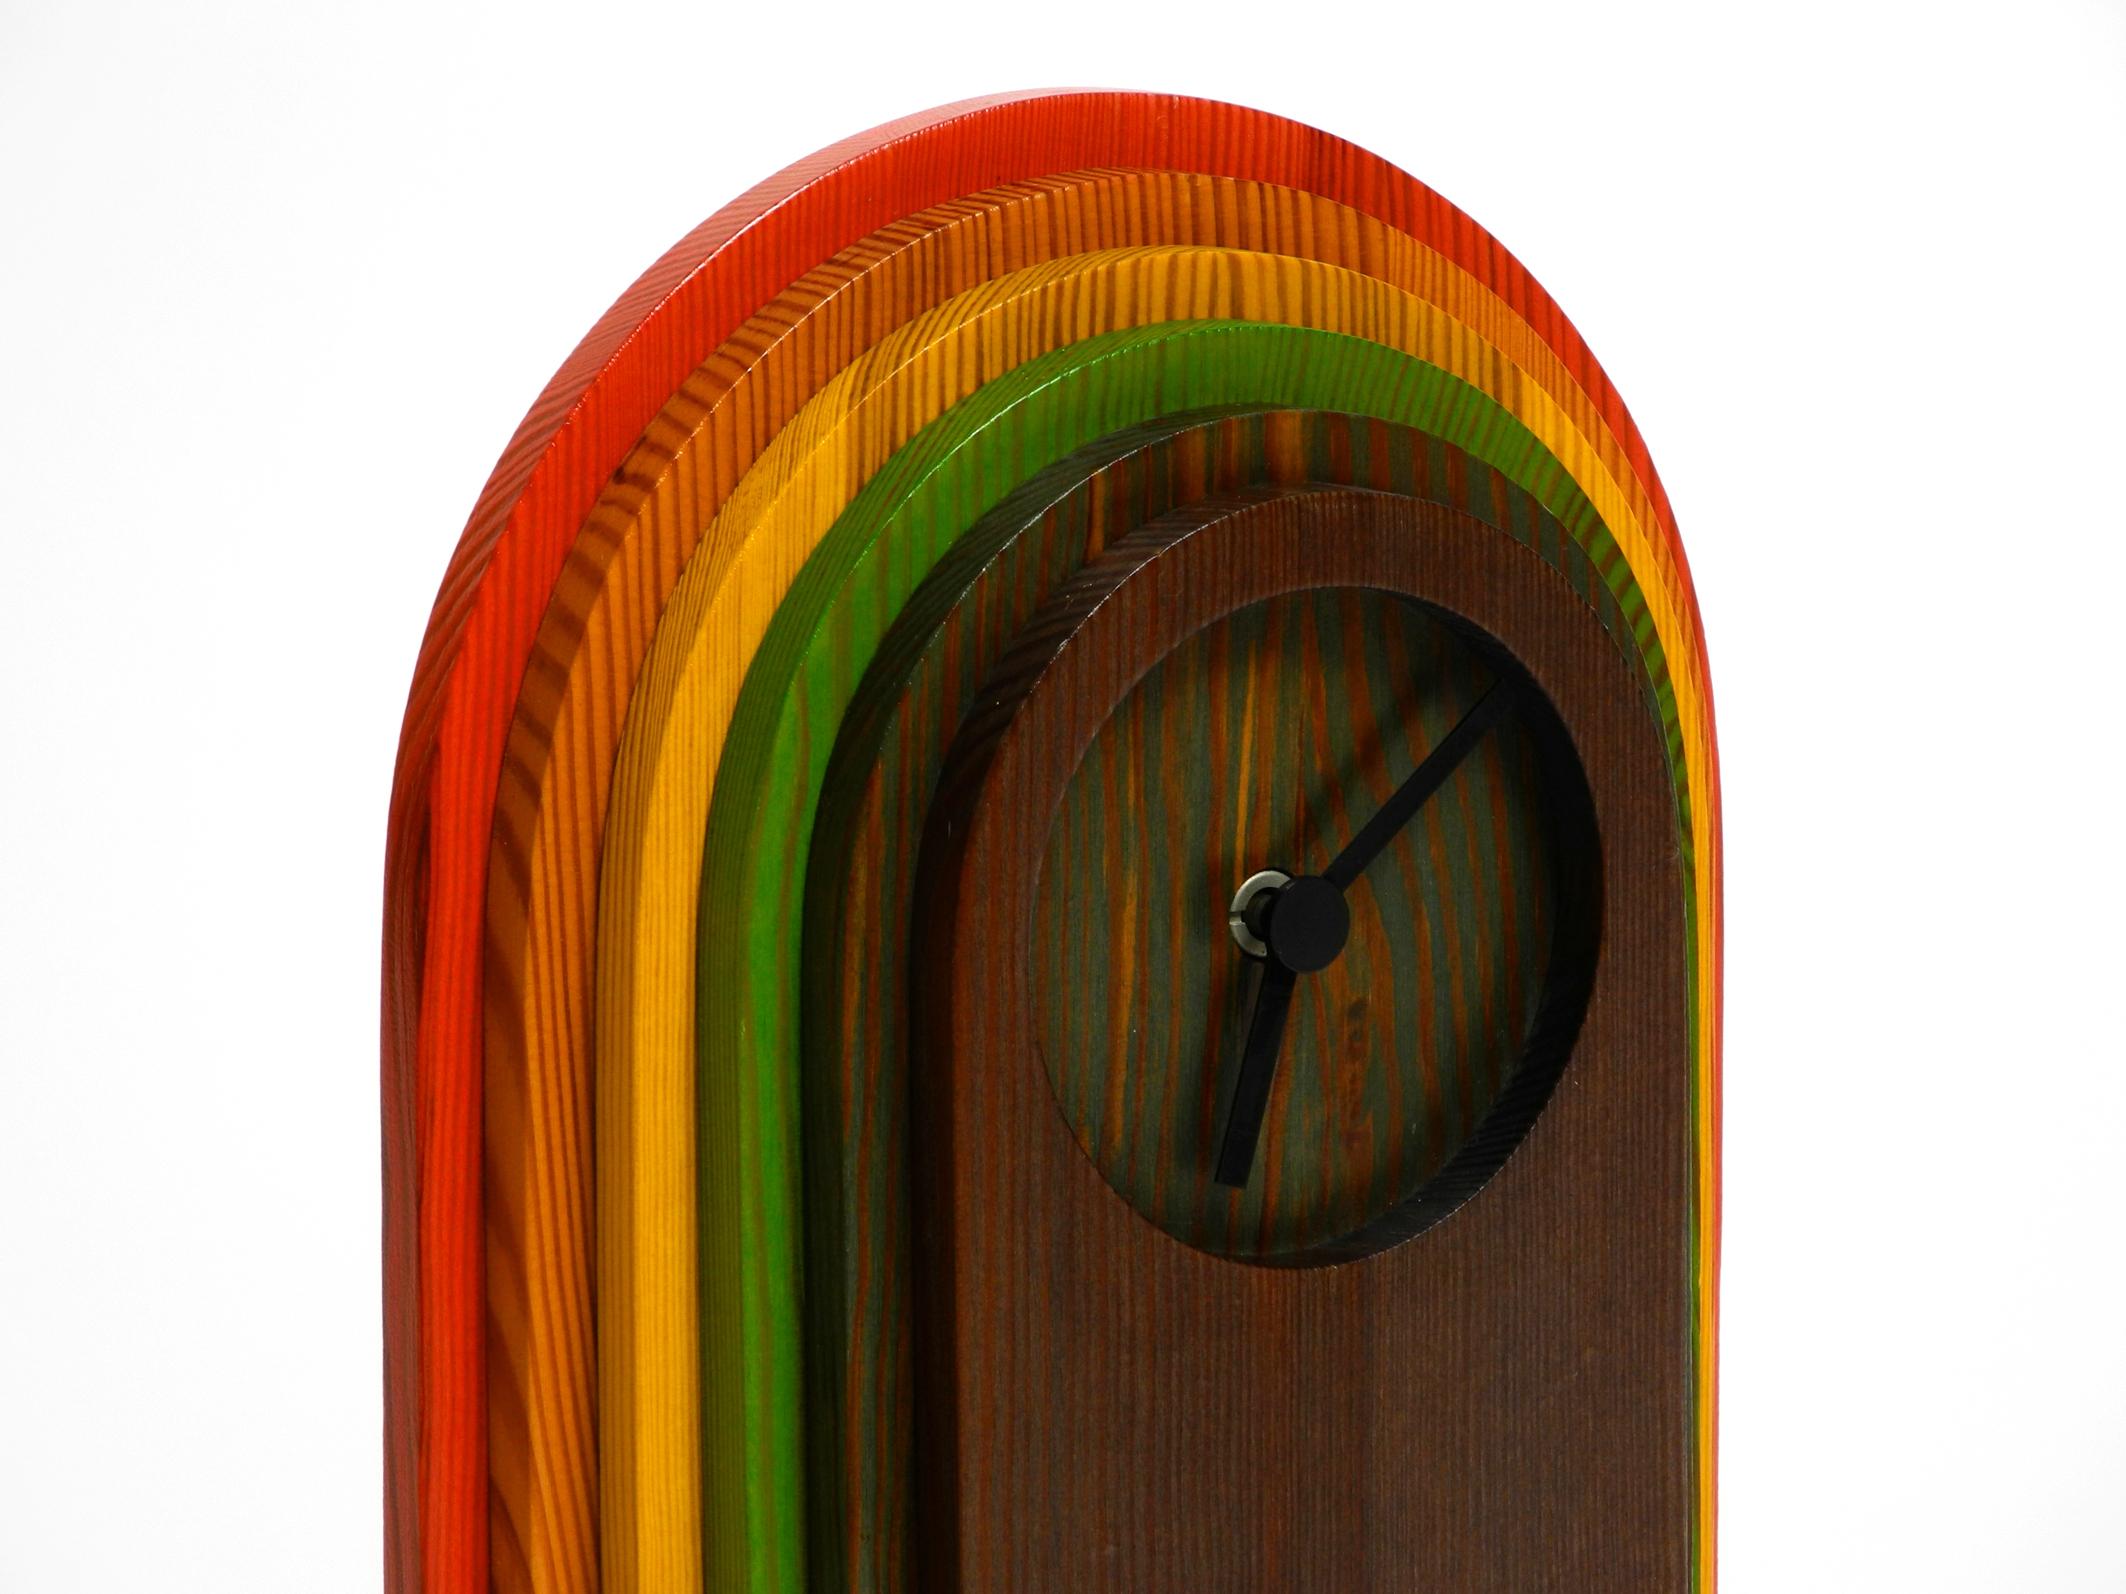 1980s, Colorful Pine Wood Table Clock in Postmodern Design by Legnomagia Italy 1